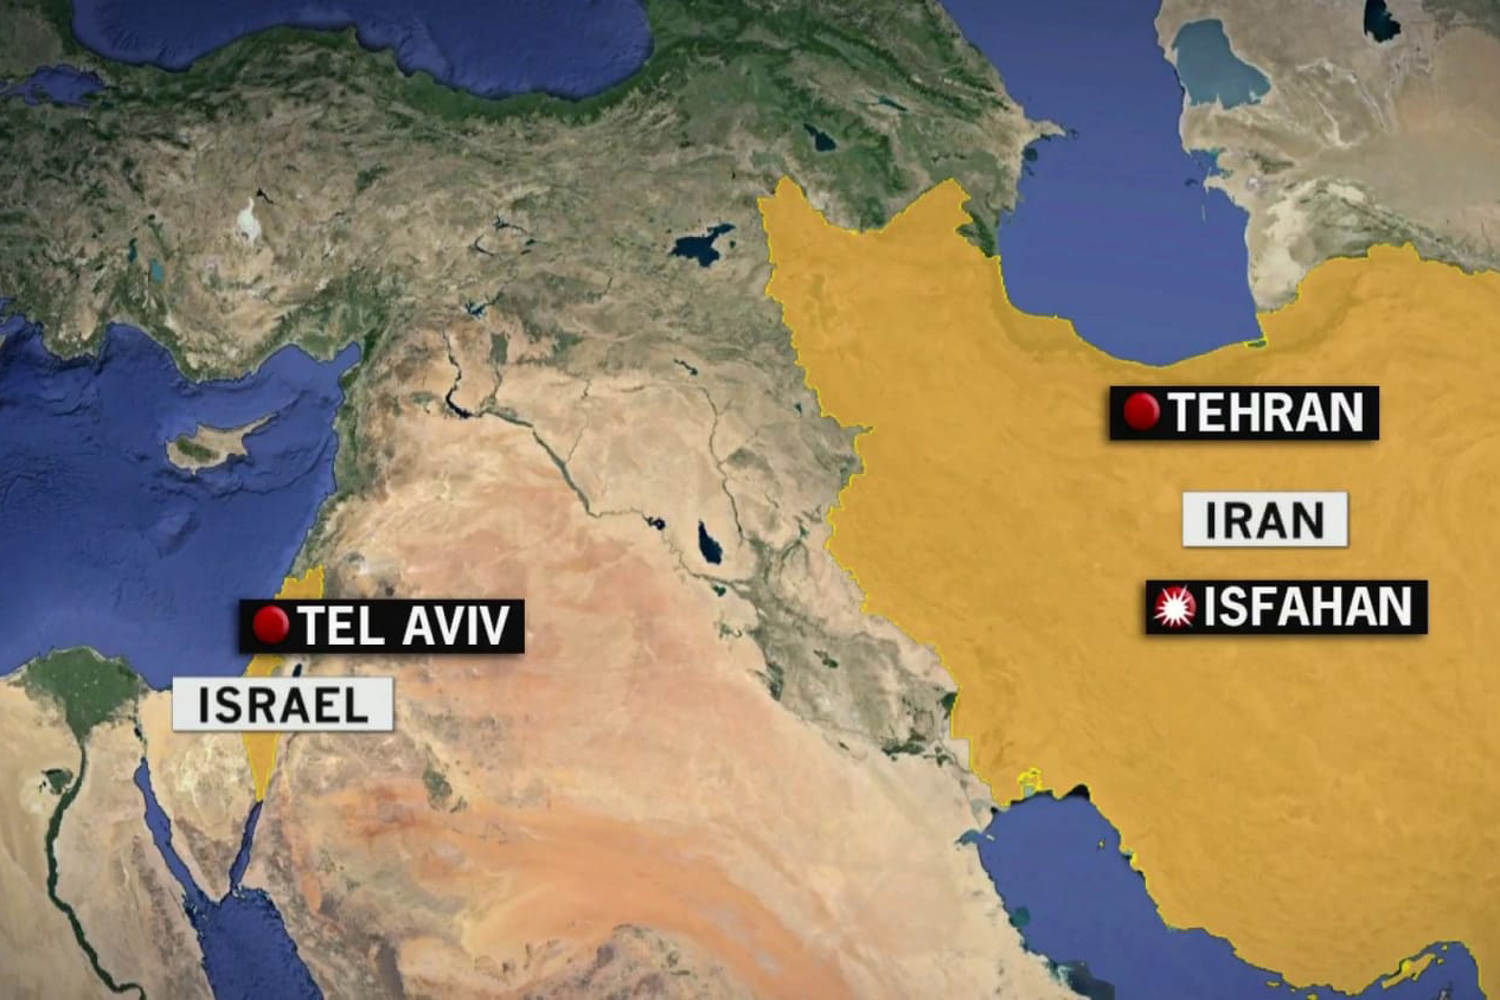 Israel carries out strike in Iran, source says